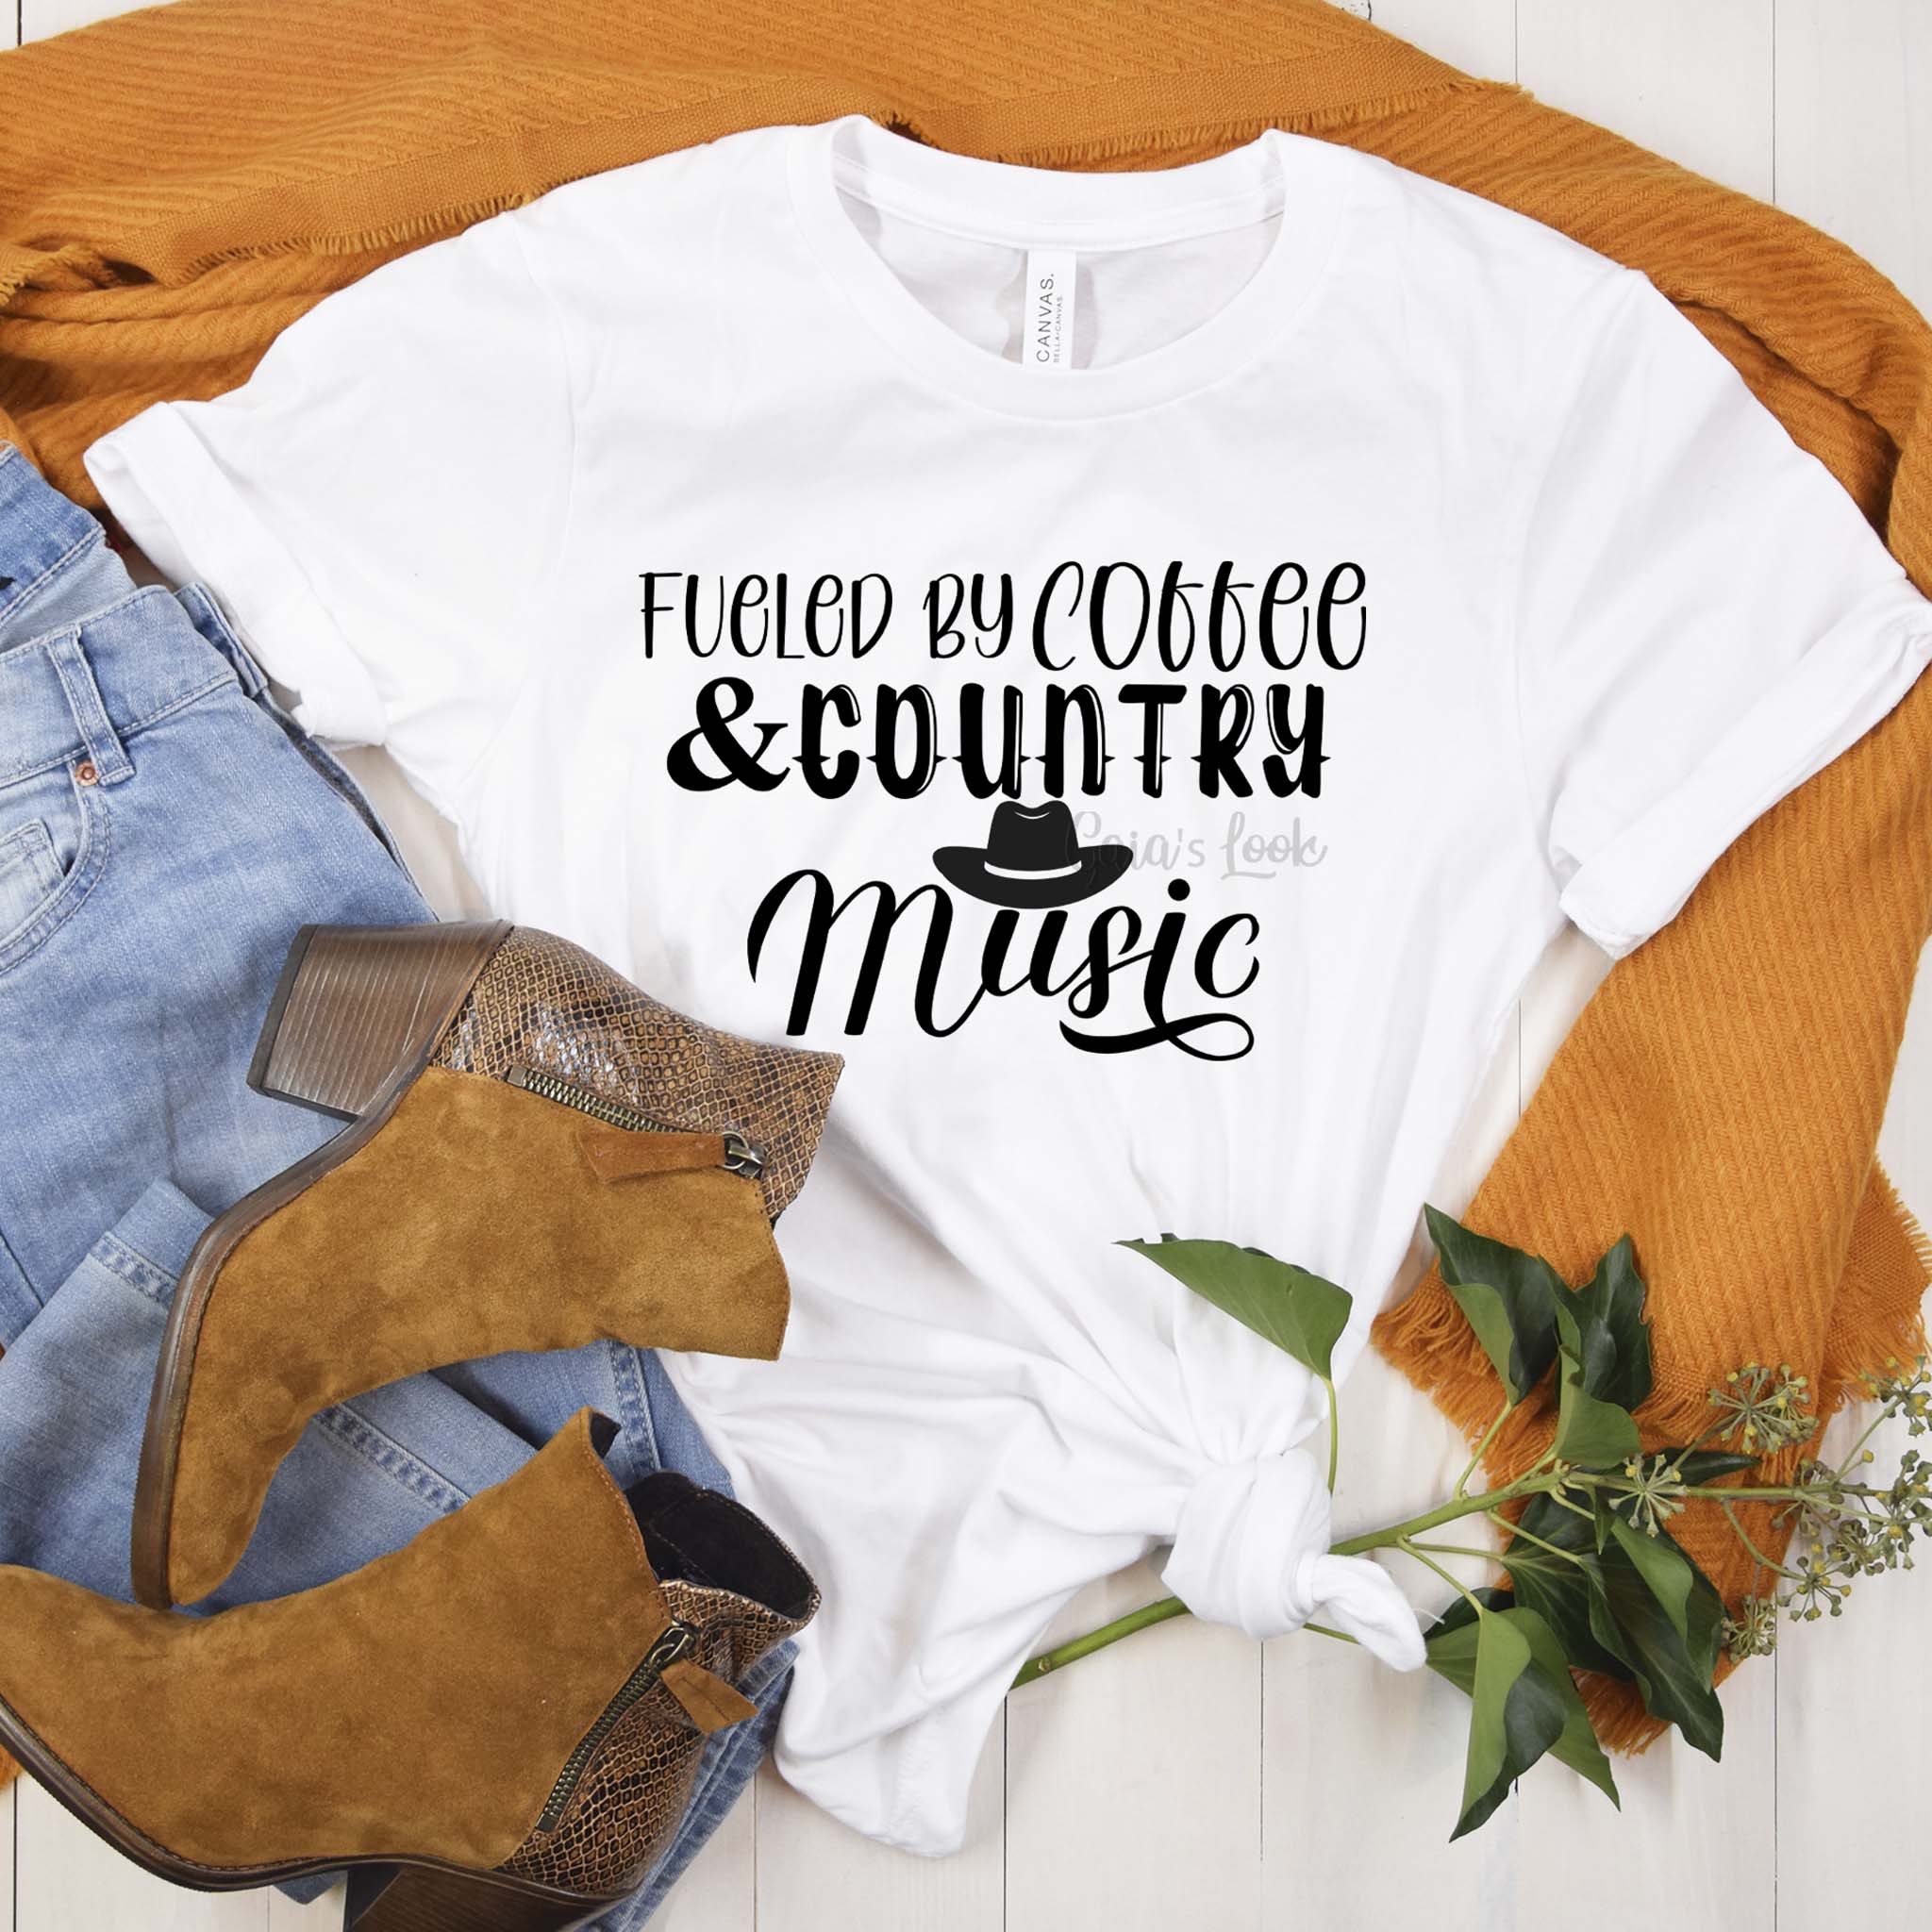 Fueled By Coffee and Country Music T Shirt